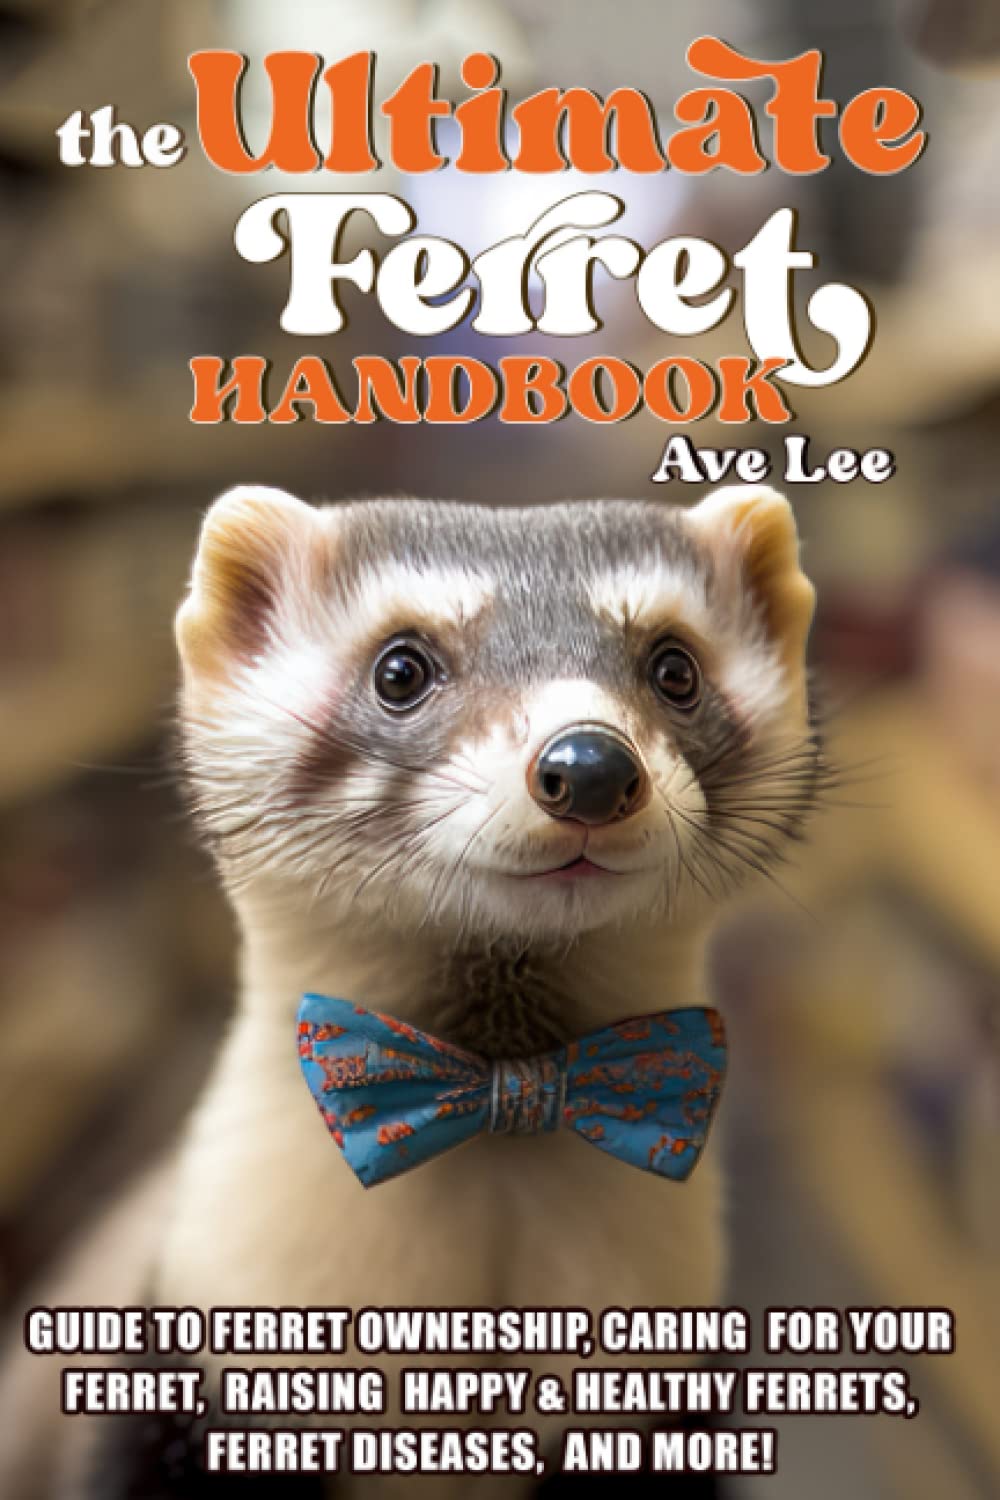 The Ultimate Ferret Handbook: Guide to Ferret Ownership, Caring for your Ferret, Raising Happy & Healthy Ferrets, Ferret Diseases, and More!